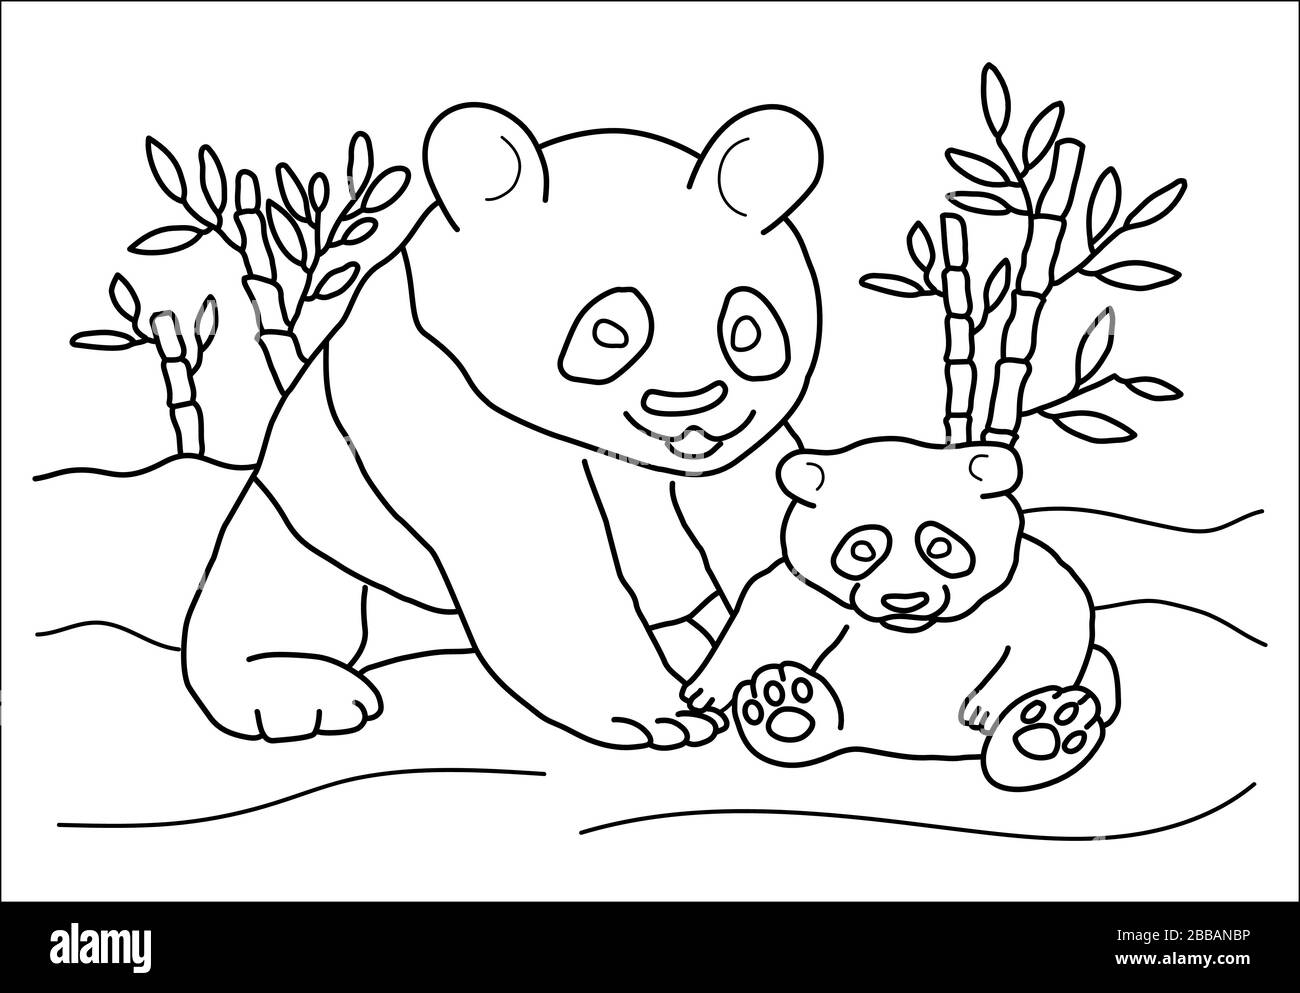 Panda Coloring Book At The Zoo For Children Stock Vector Image Art Alamy